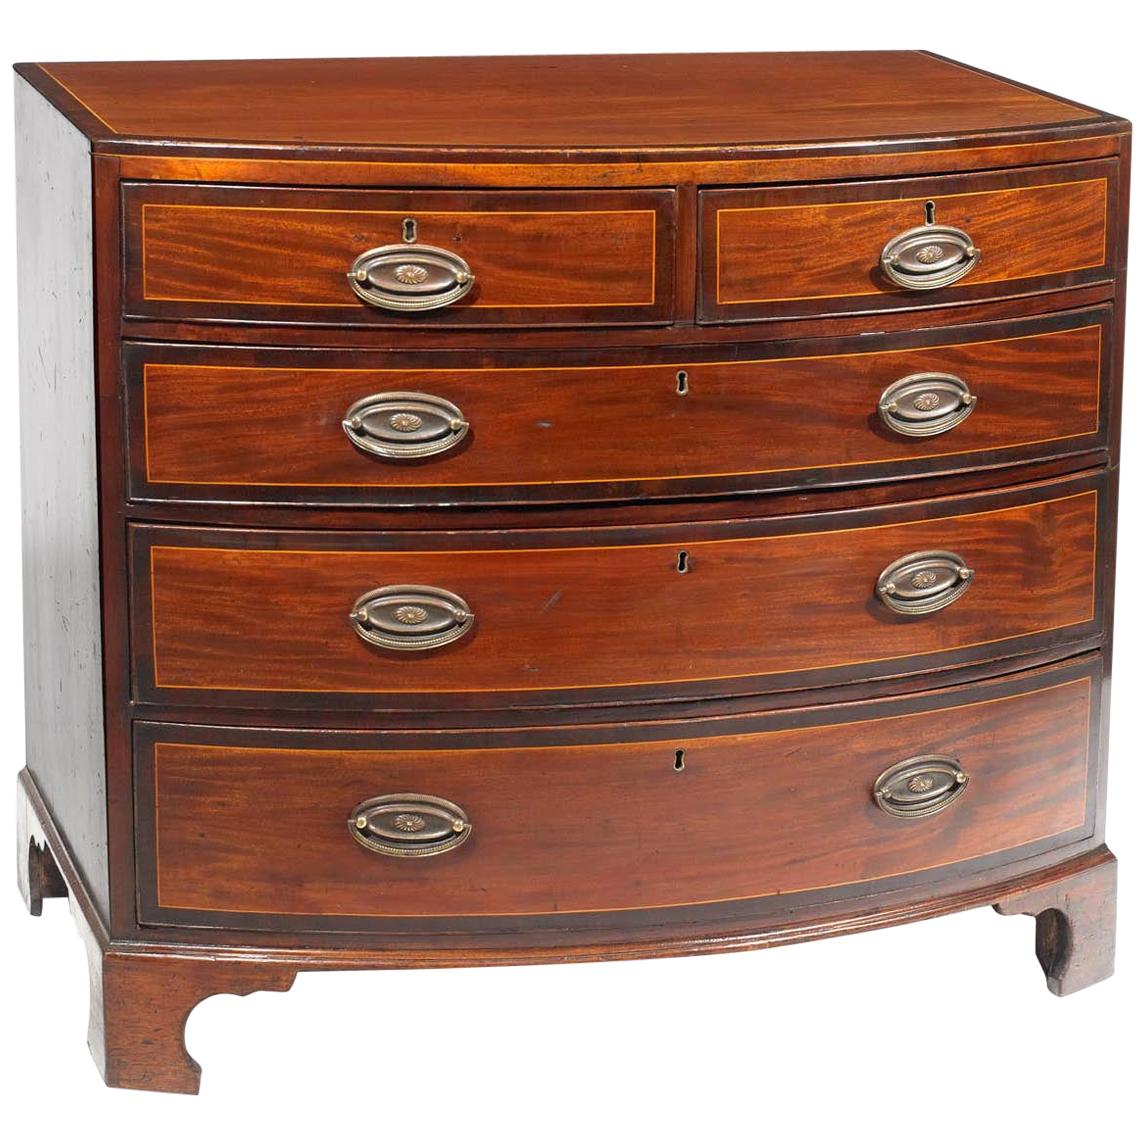 Early 19th Century Bowfront Chest of Drawers after Thomas Sheraton For Sale